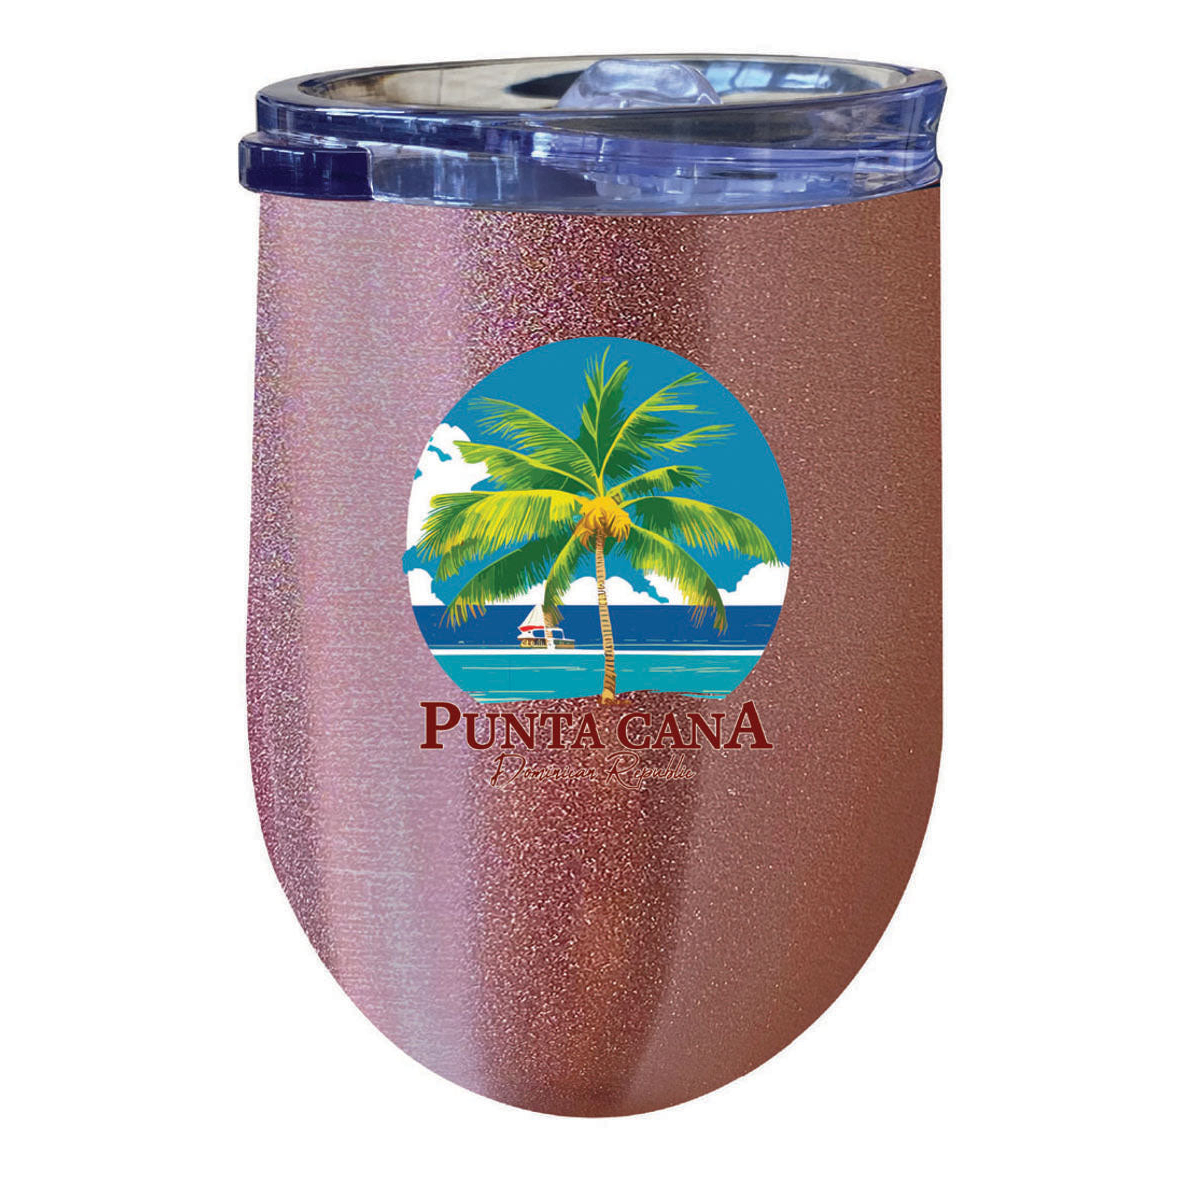 Punta Cana Dominican Republic Souvenir 12 Oz Insulated Wine Stainless Steel Tumbler - Rose Gold, PARROT B